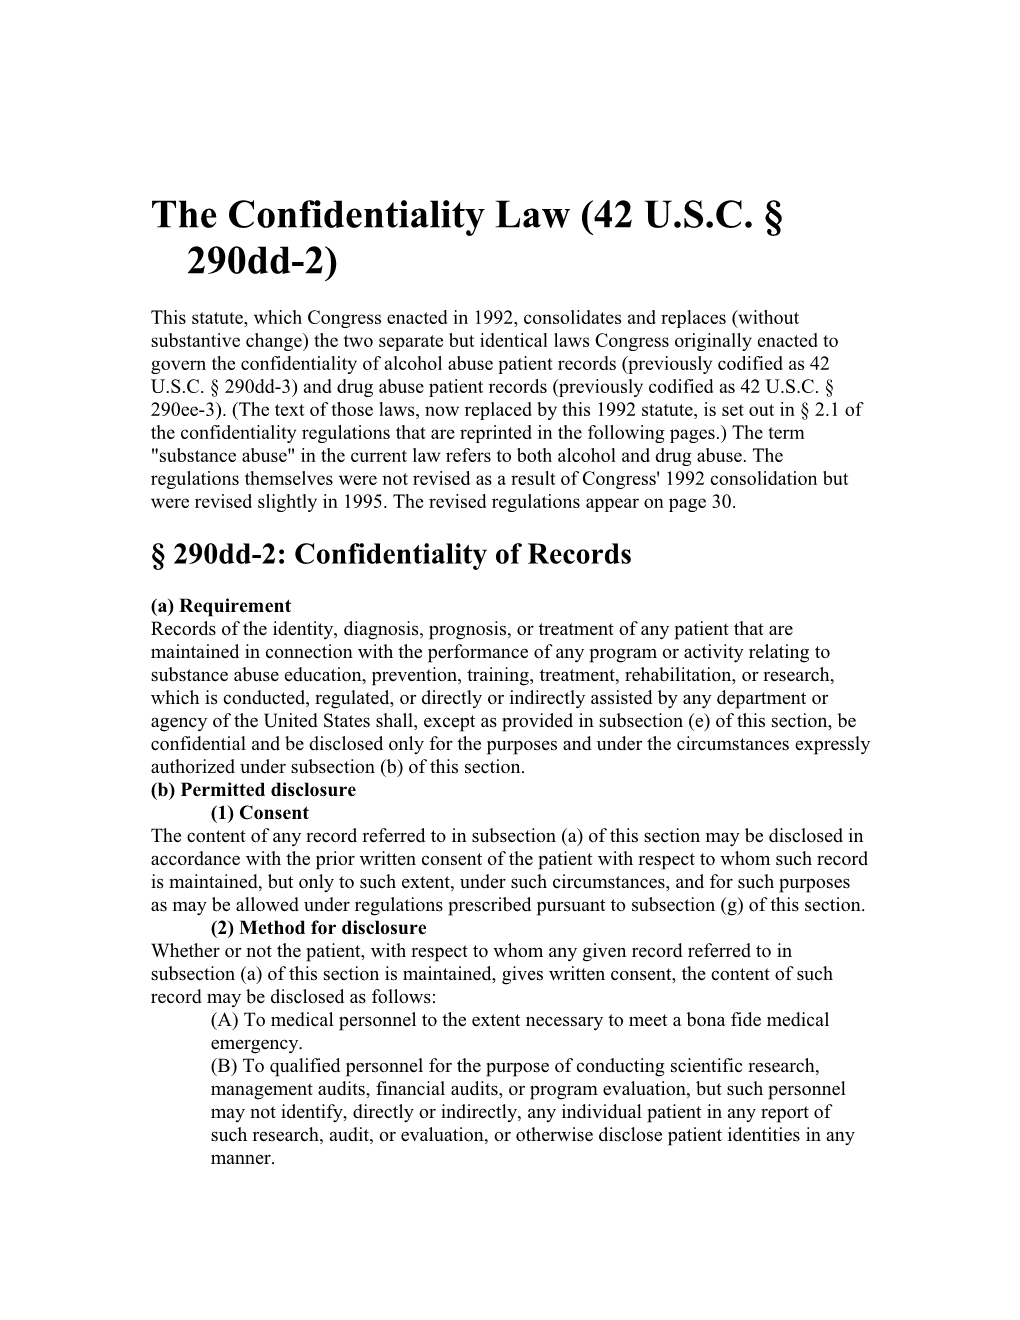 The Confidentiality Law (42 U